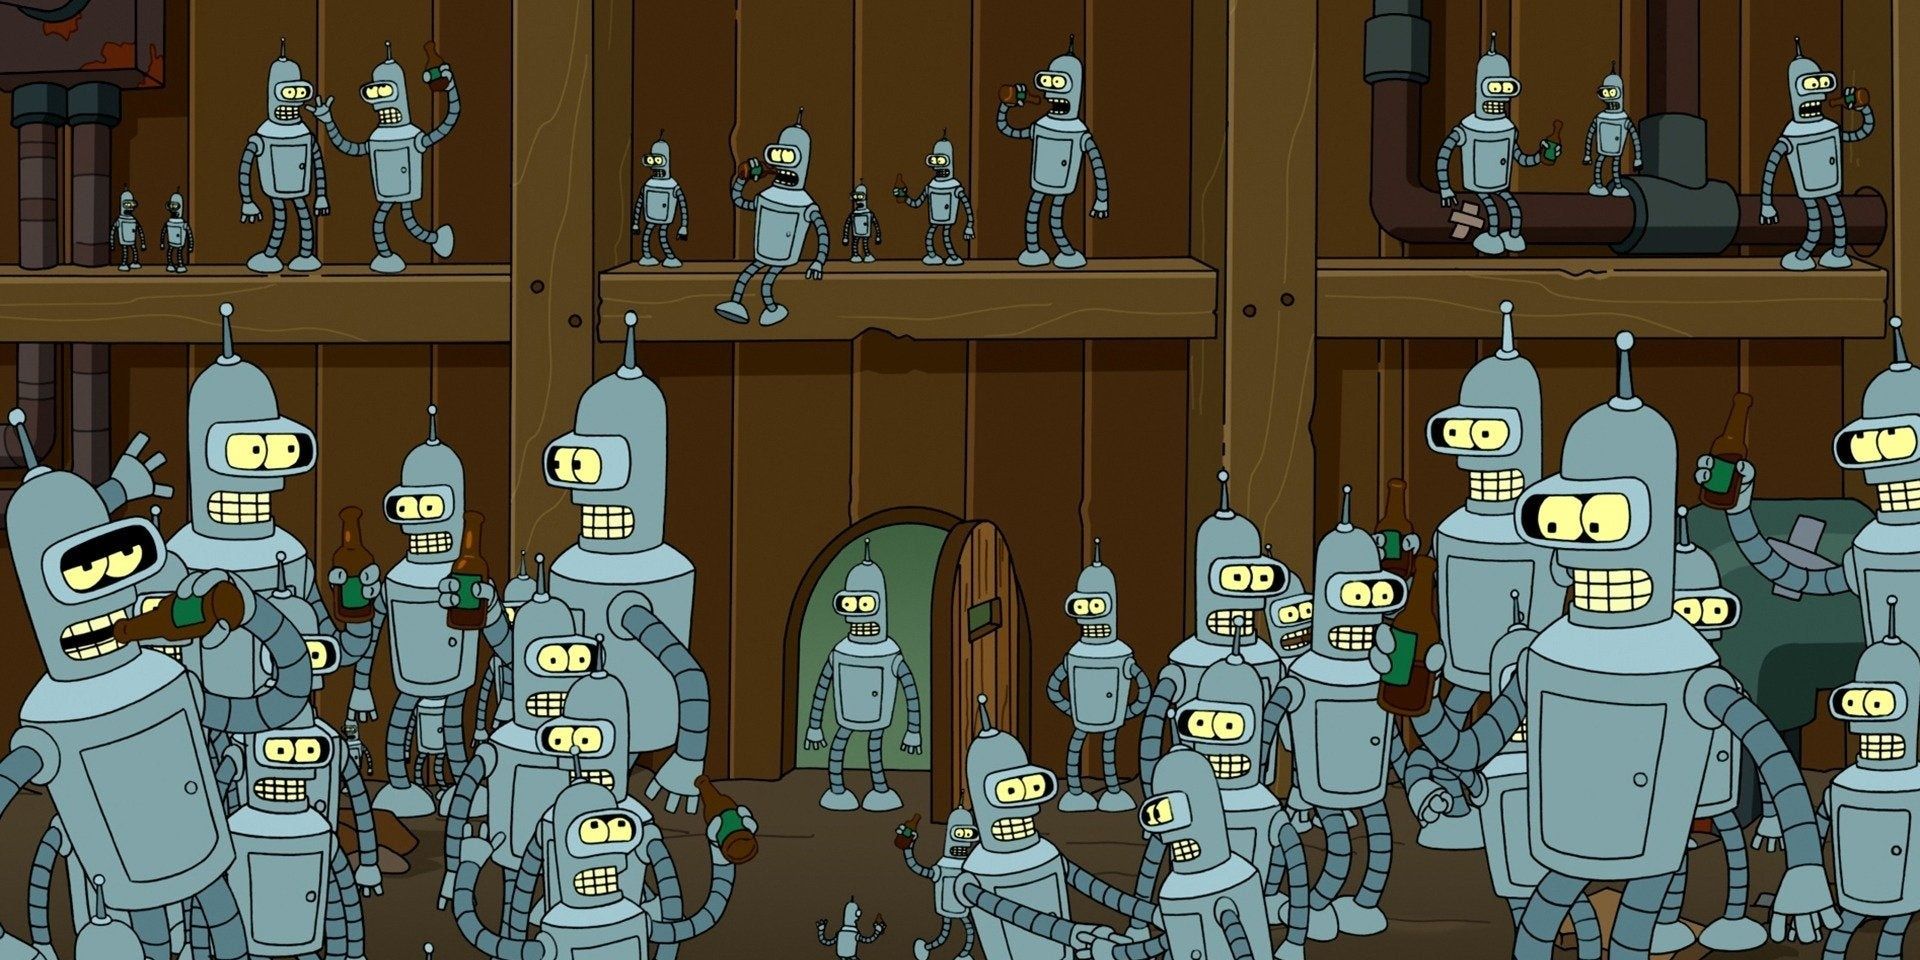 Tons of Benders clones from the episode where Professor makes a duplicating machine